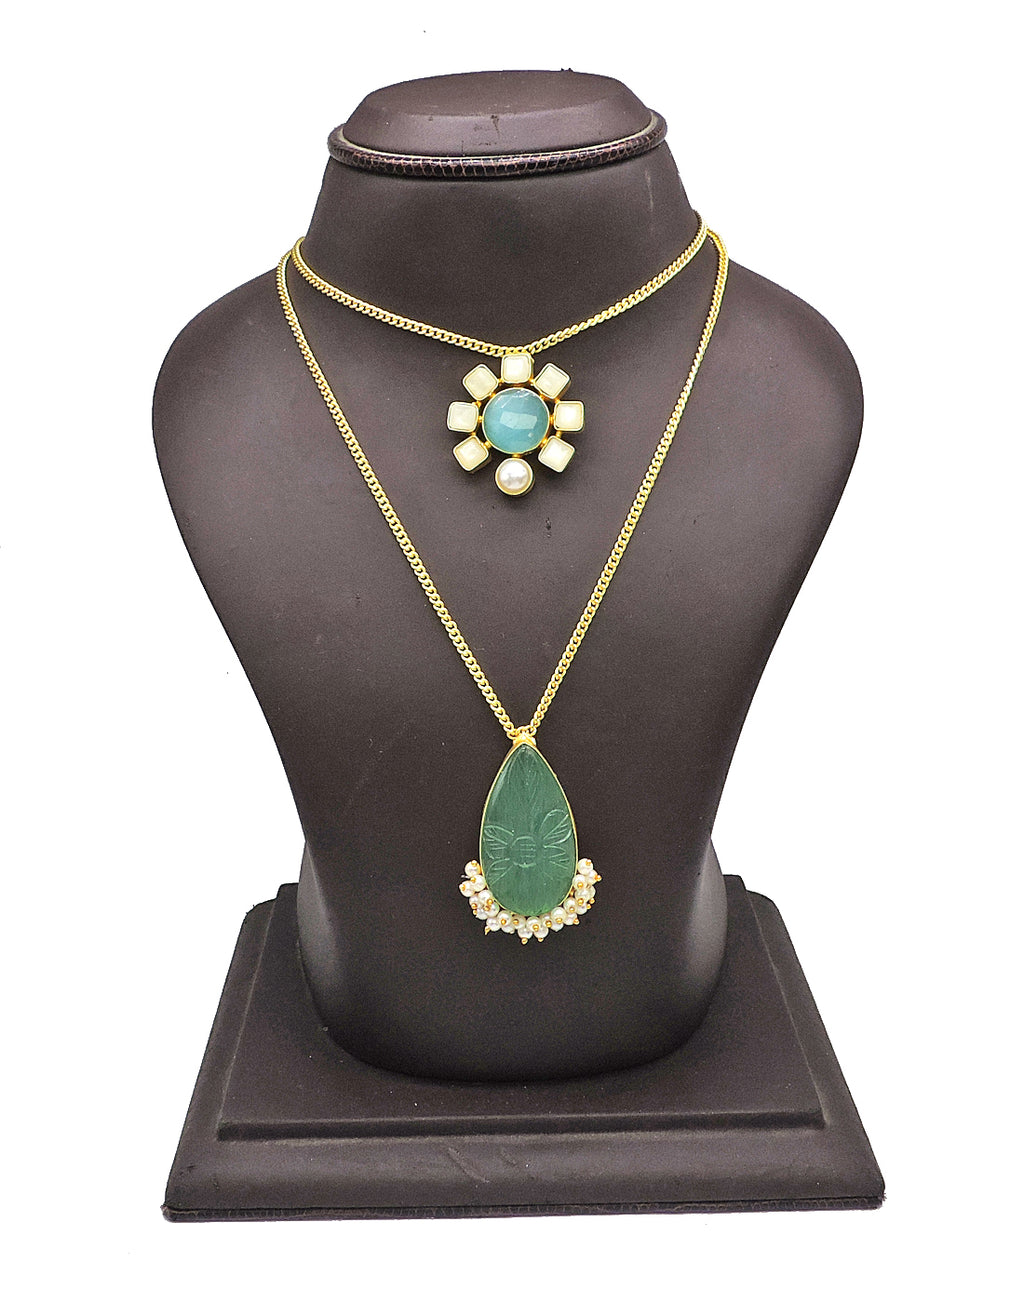 Green Monalisa Necklace - Statement Necklaces - Gold-Plated & Hypoallergenic Jewellery - Made in India - Dubai Jewellery - Dori